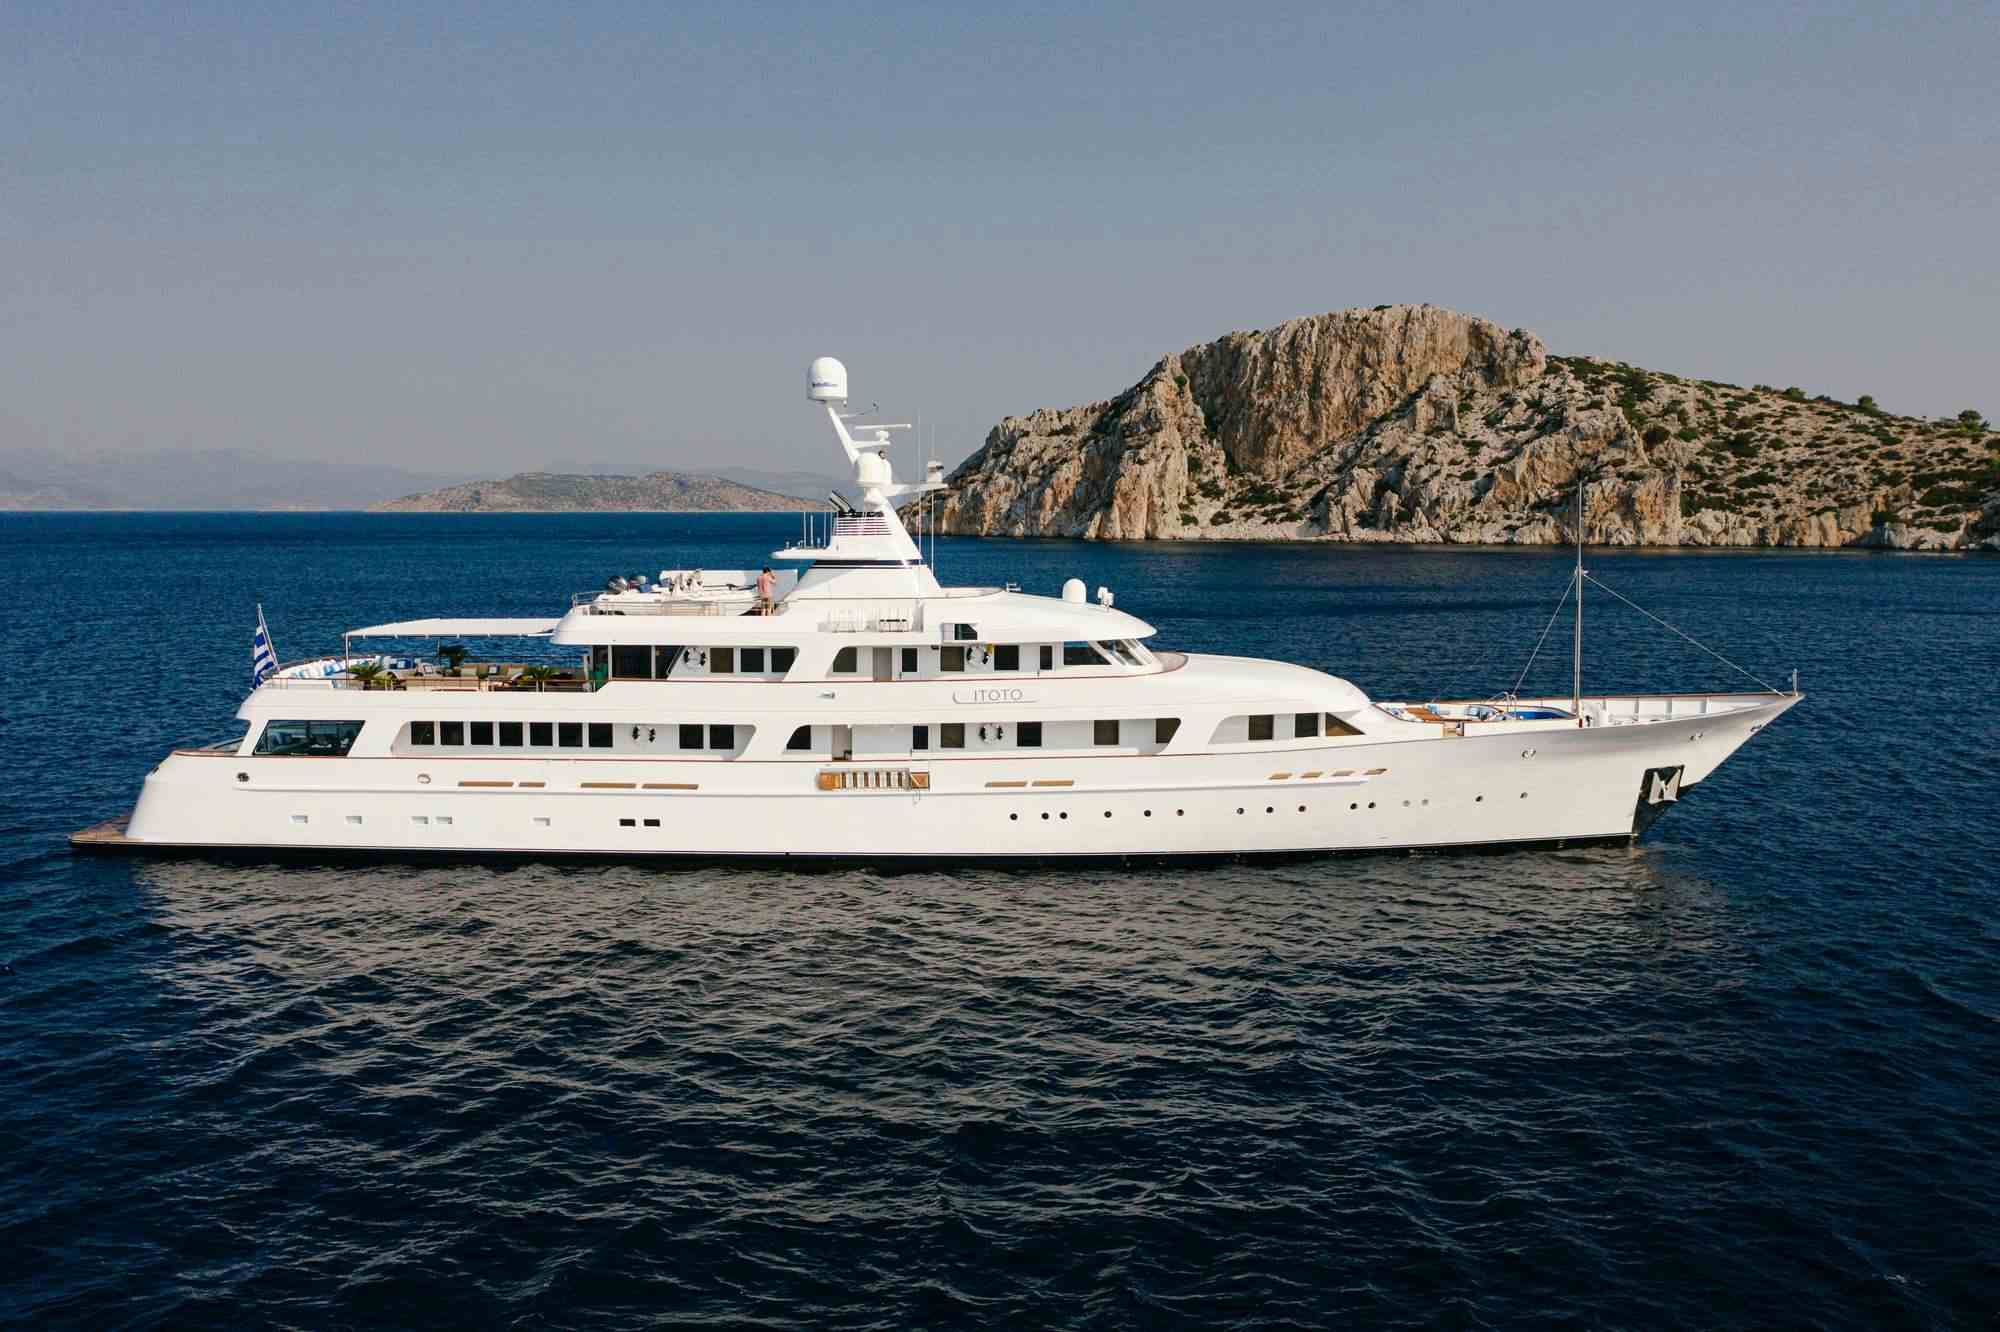 ITOTO - Yacht Charter Greece & Boat hire in Greece 1